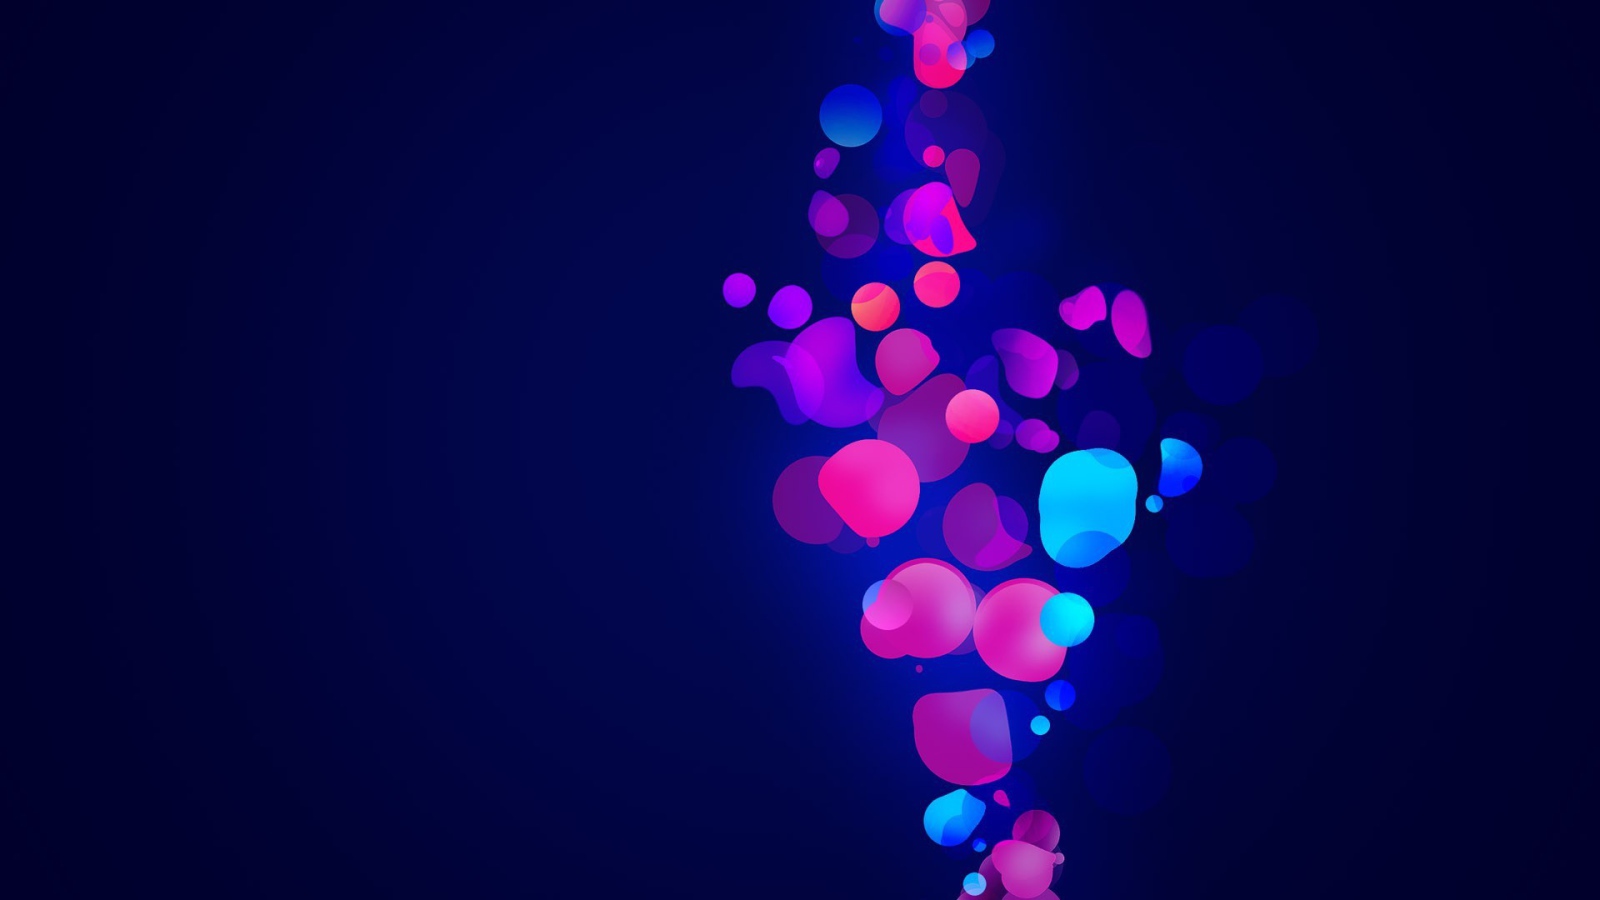 Abstract pink and blue shapes on a blue background